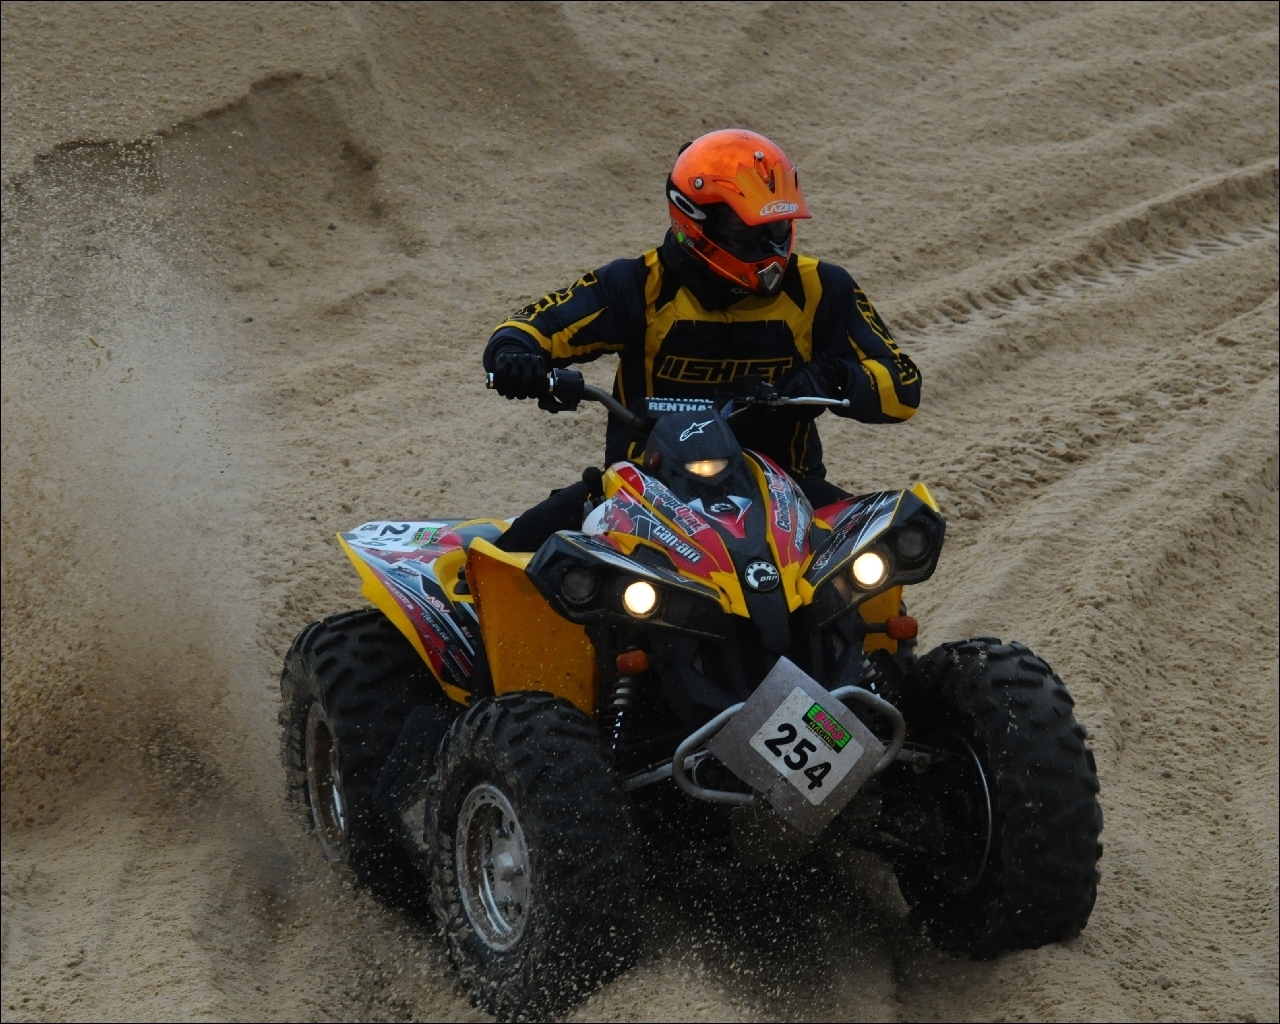 ATV free Wallpapers (13 photos) for your desktop, download pictures